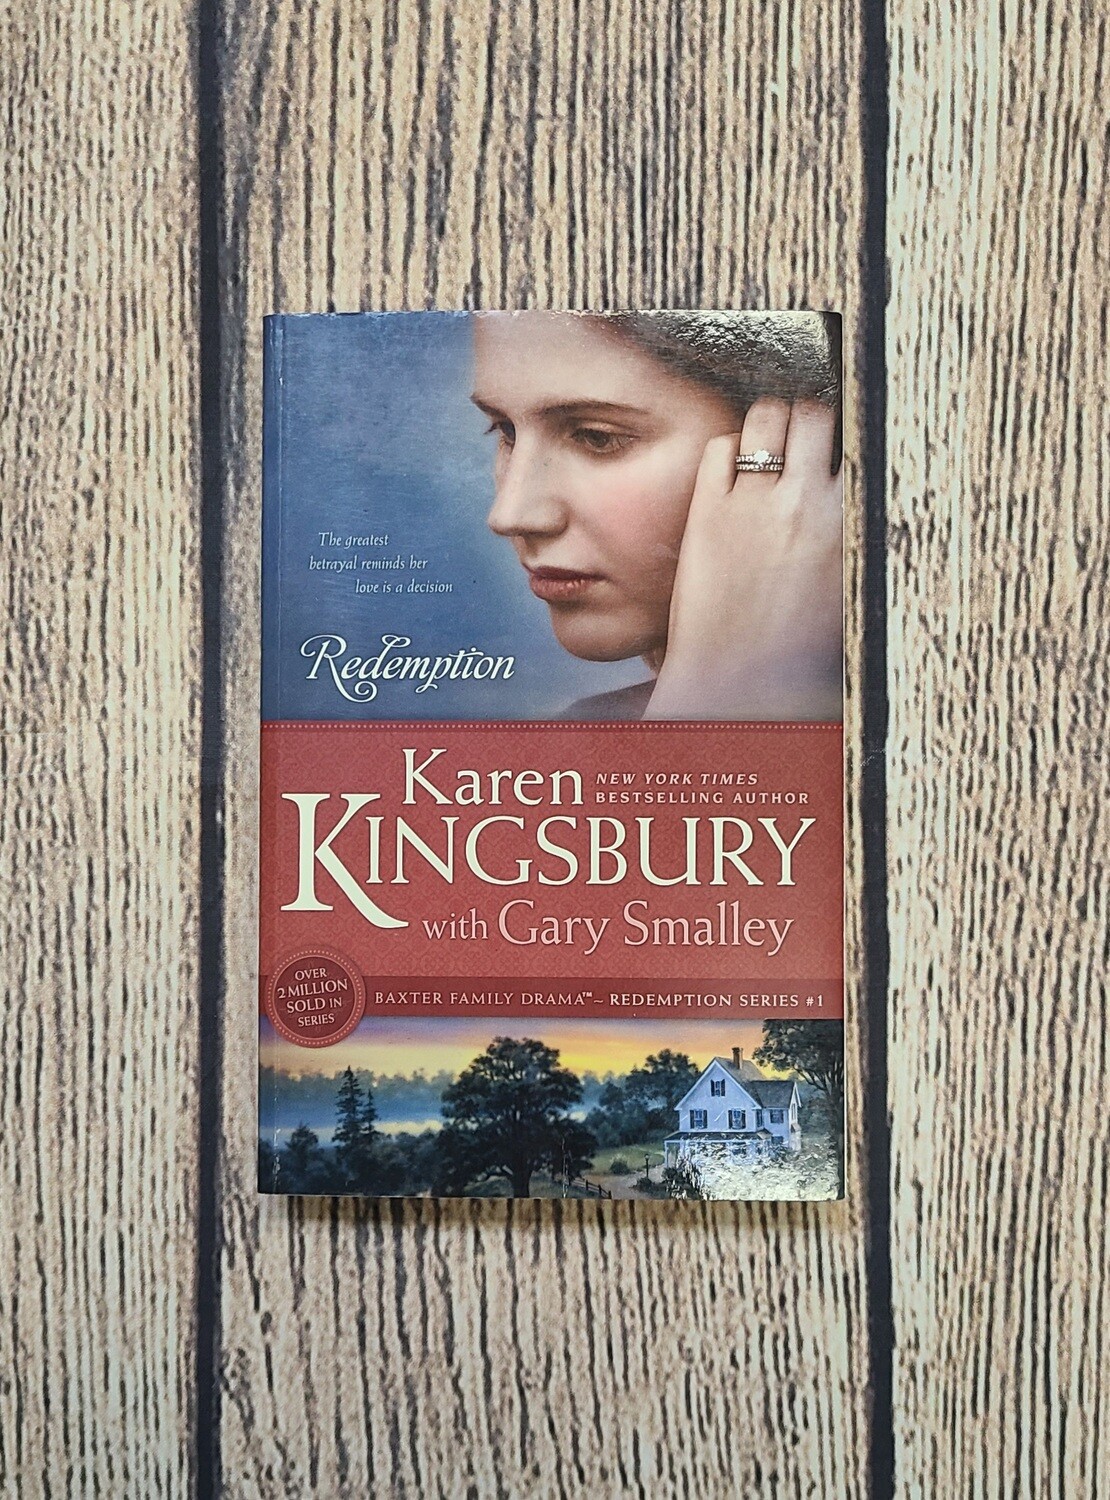 Redemption by Karen Kingsbury with Gary Smalley - Paperback - Great Condition